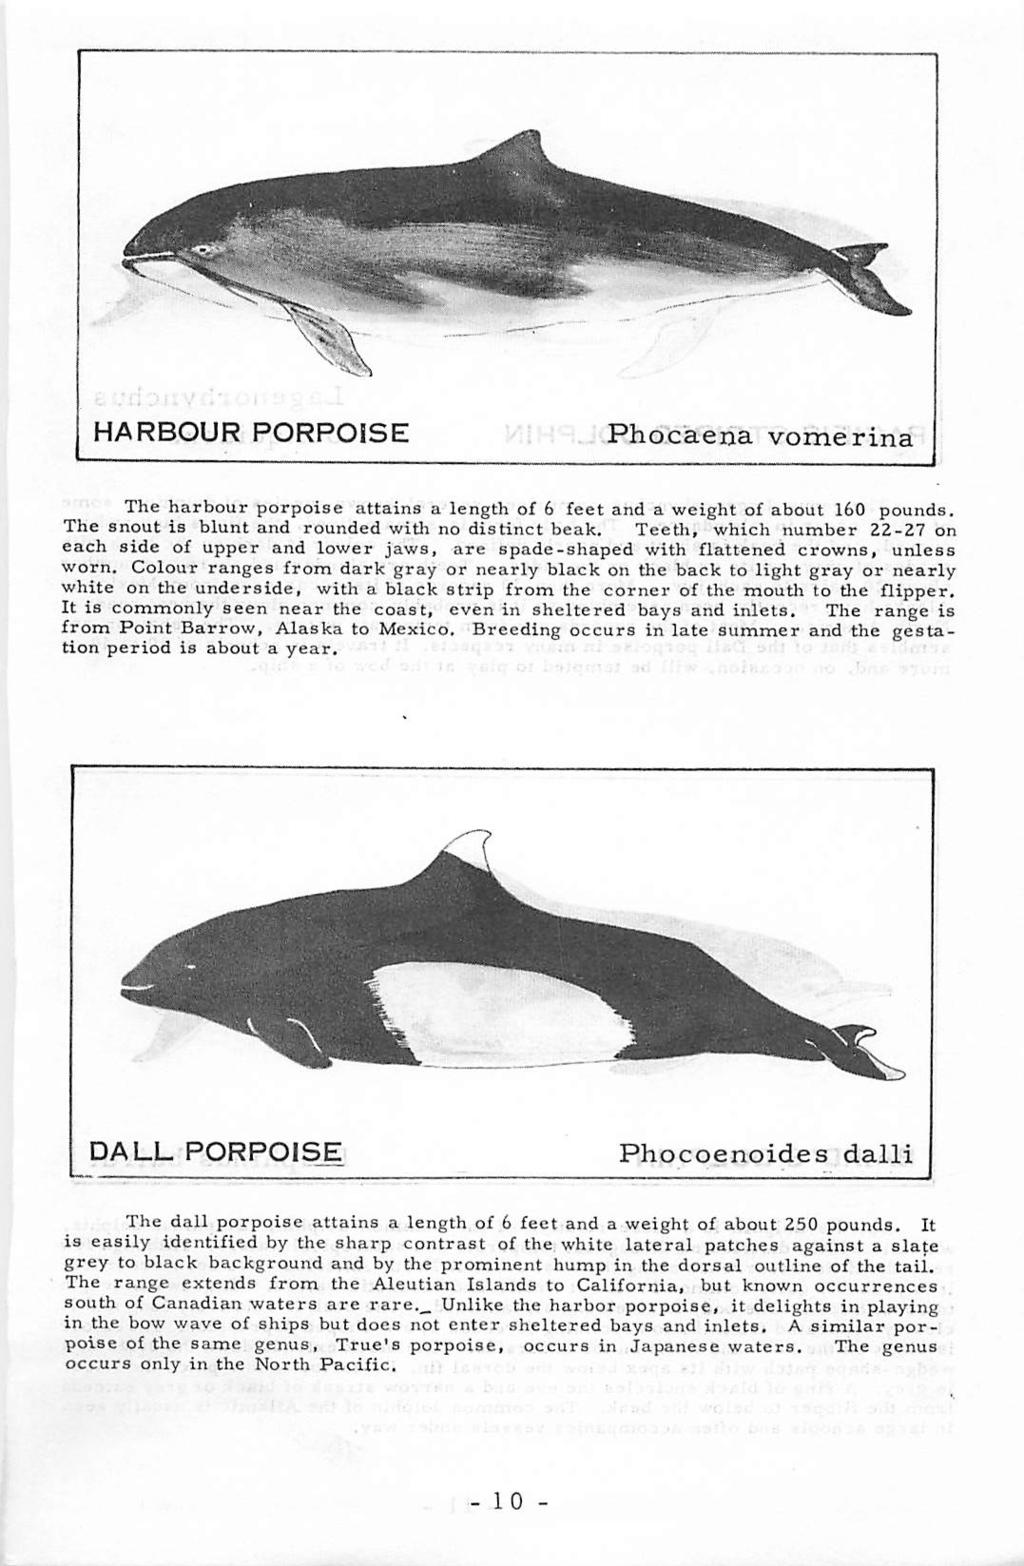 HARBOUR PORPOISE Phocaena vomerina The harbour porpoise attains a length of 6 feet and a weight of about 160 pounds. The snout is blunt and rounded with no distinct beak.